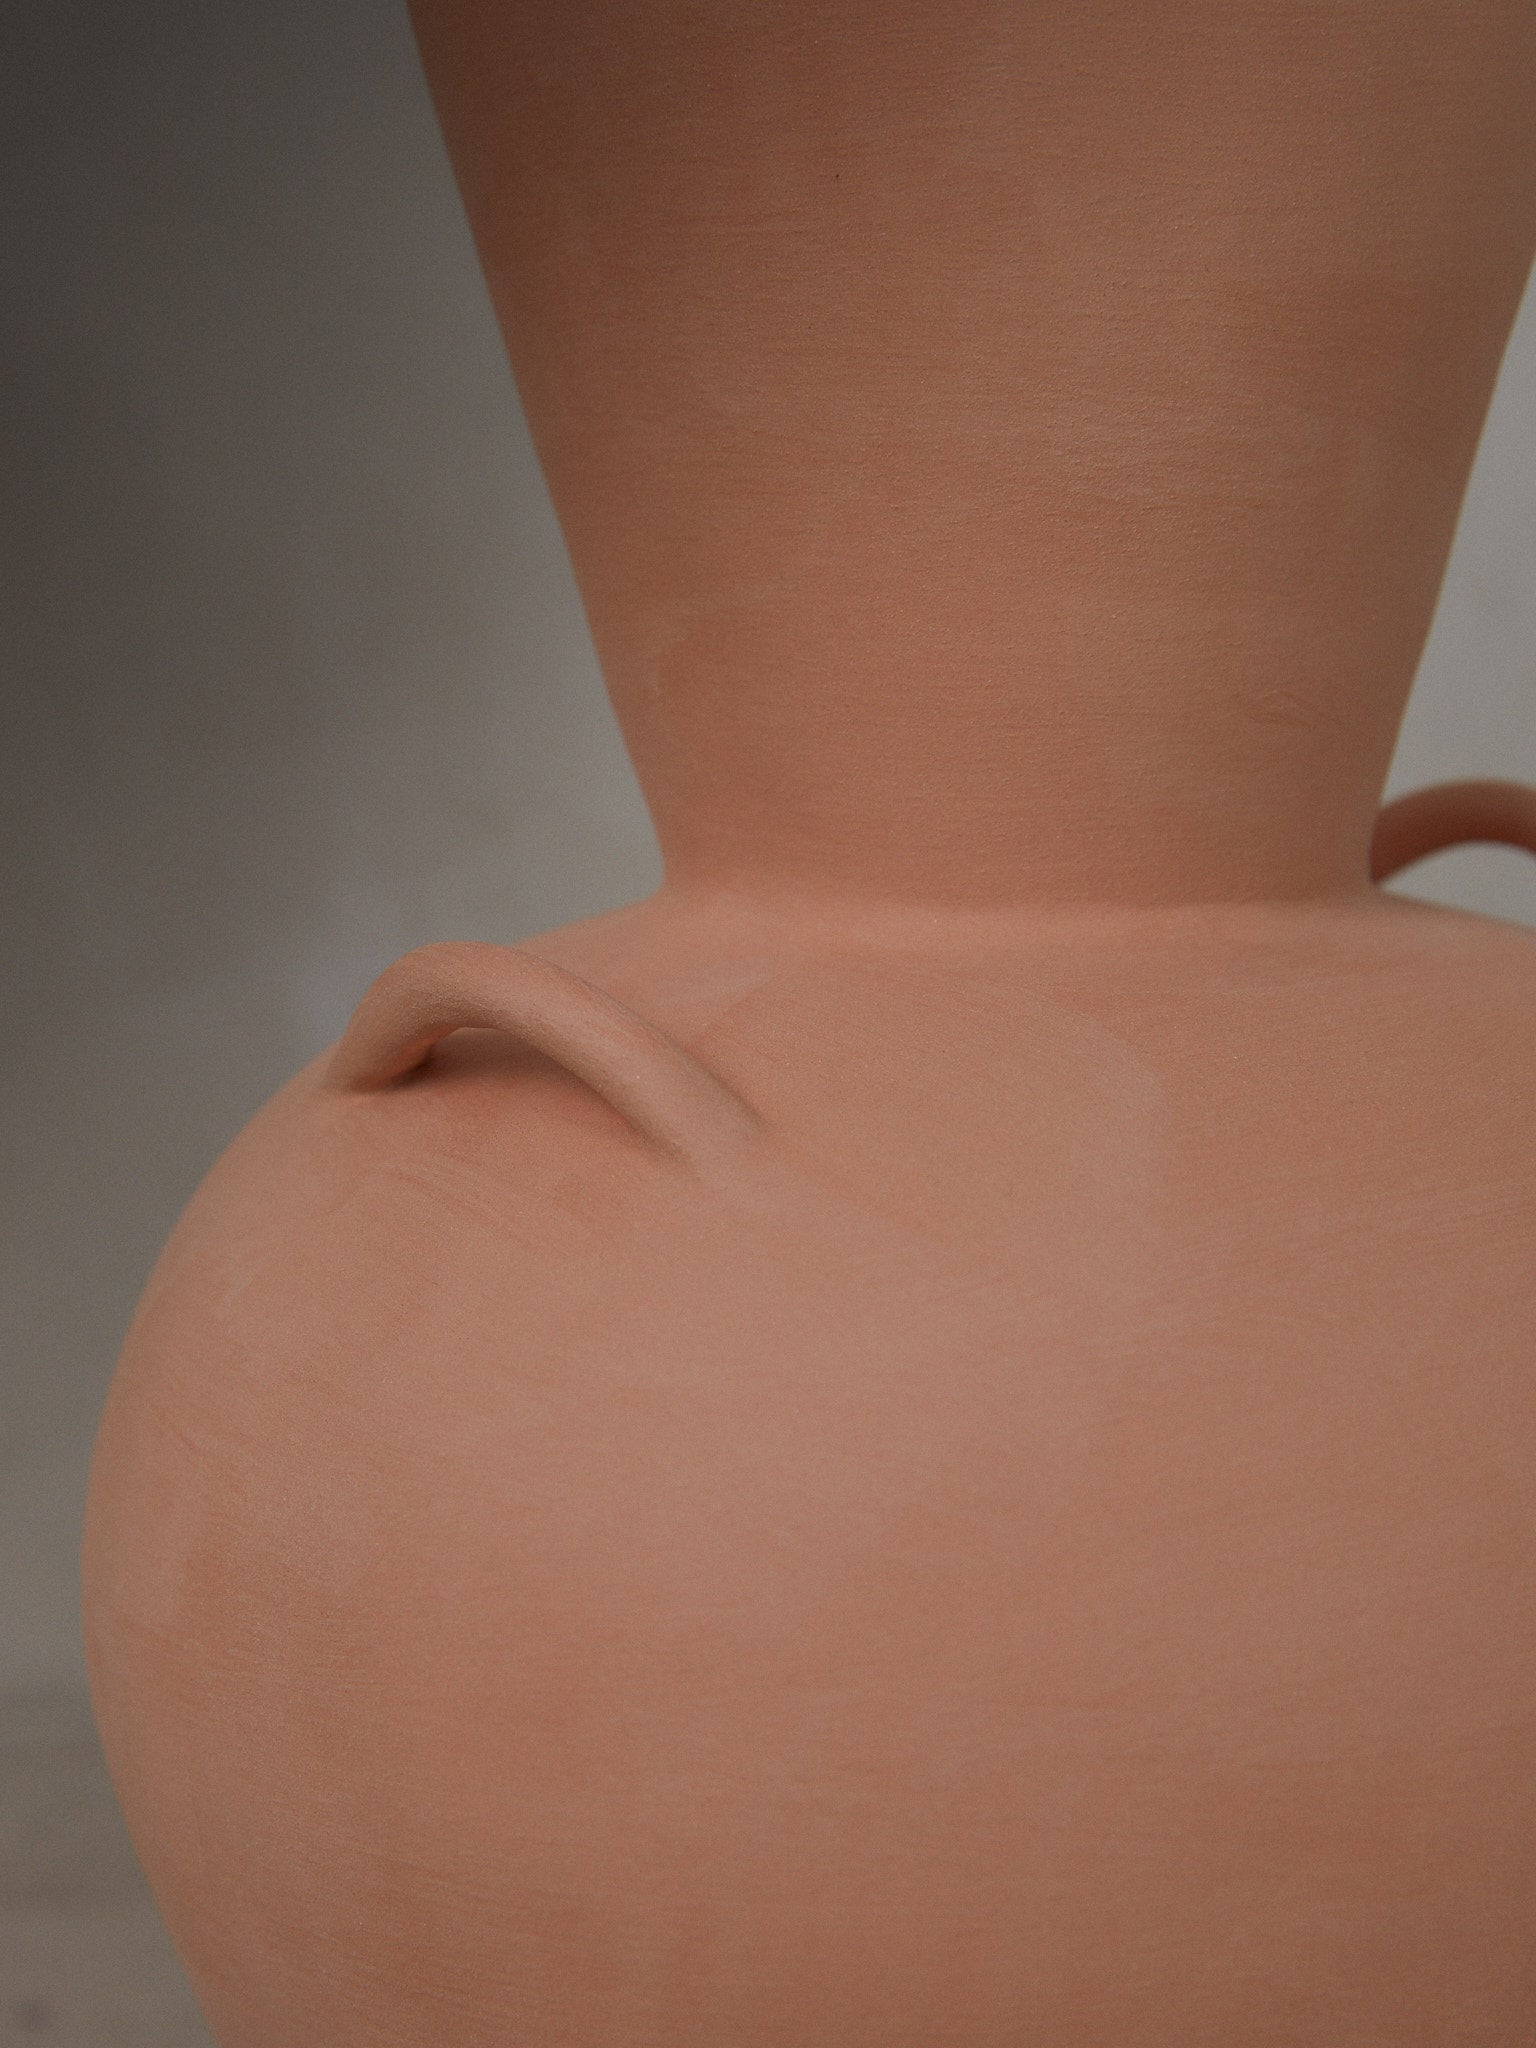 Terracotta Vase. Handmade terracotta vase with low, rounded bodice, stately neck and decorative side handles created with a modeling technique featuring traces of the artistic process.